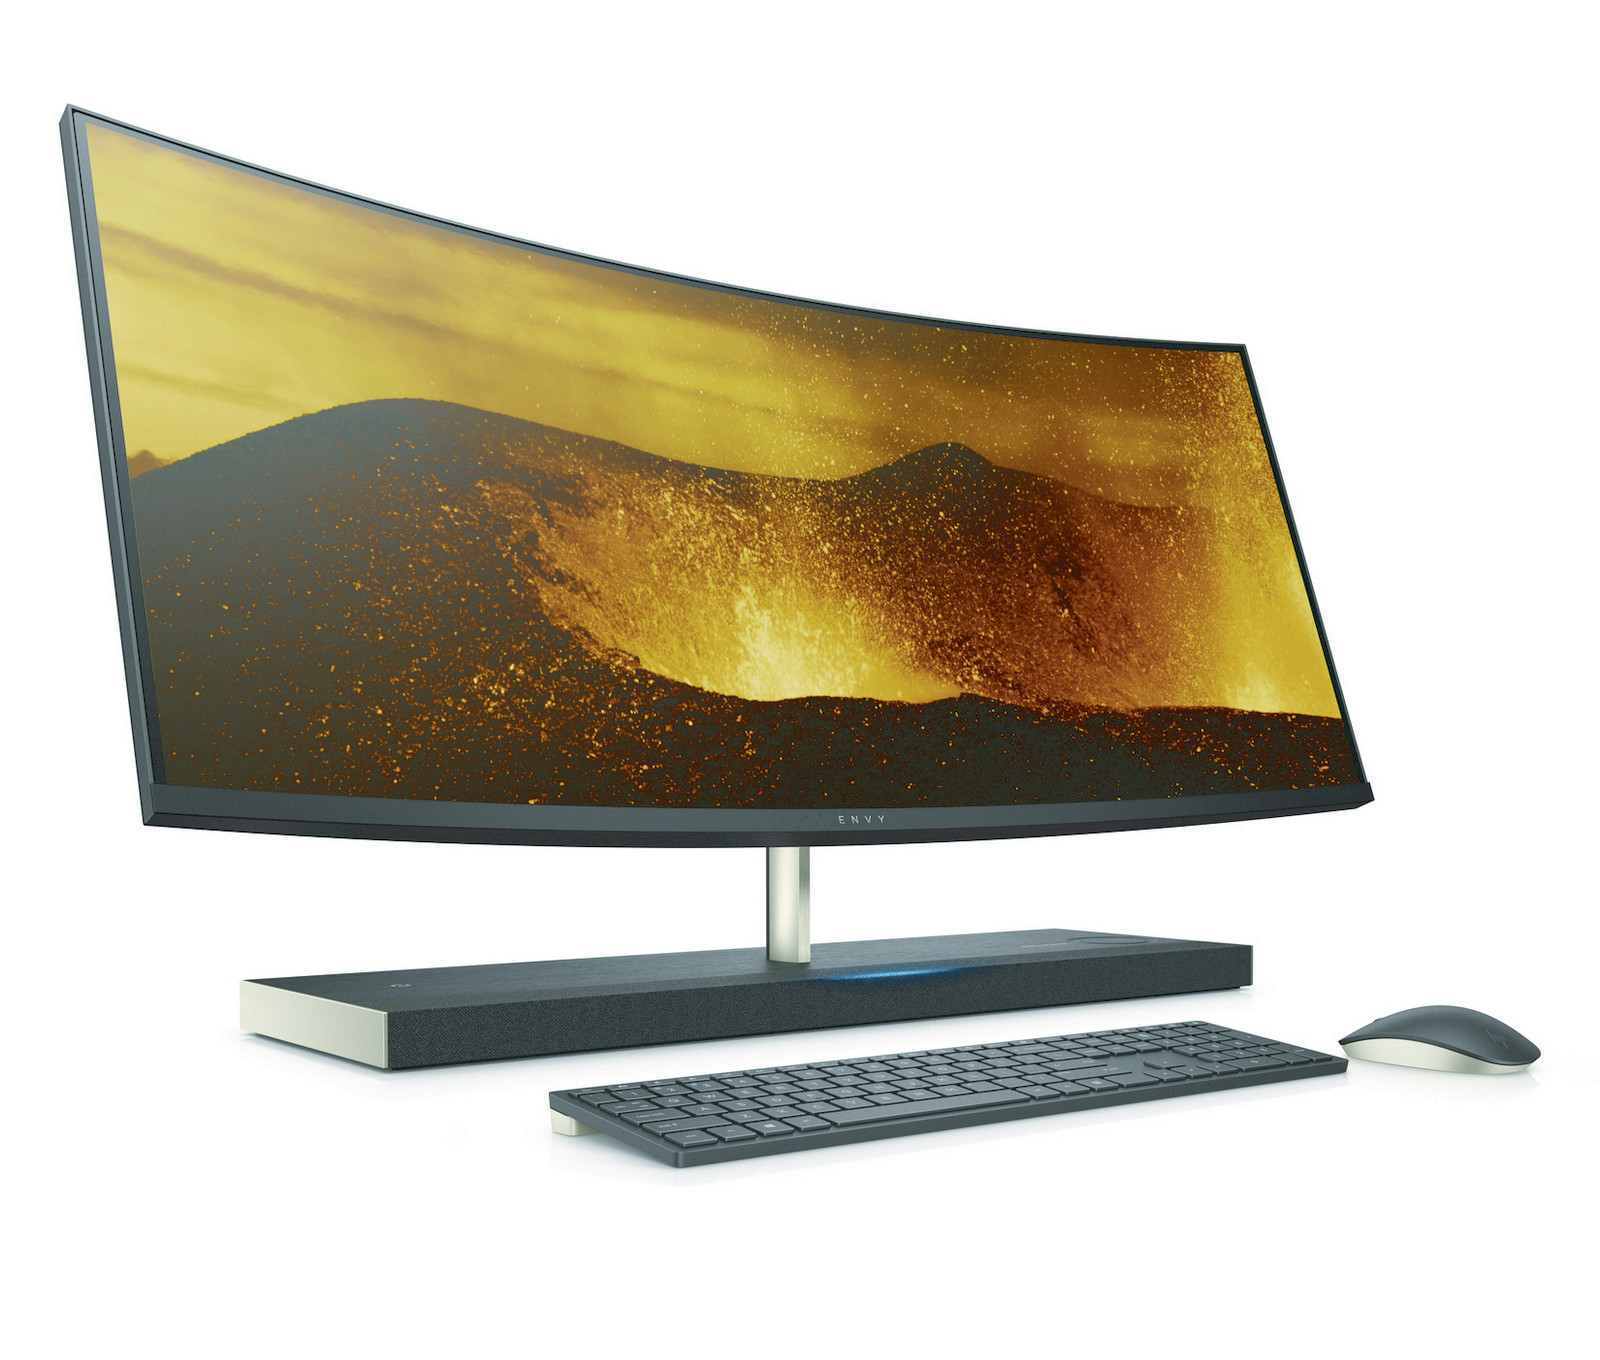 HP Envy Curved AIO Spring 2018